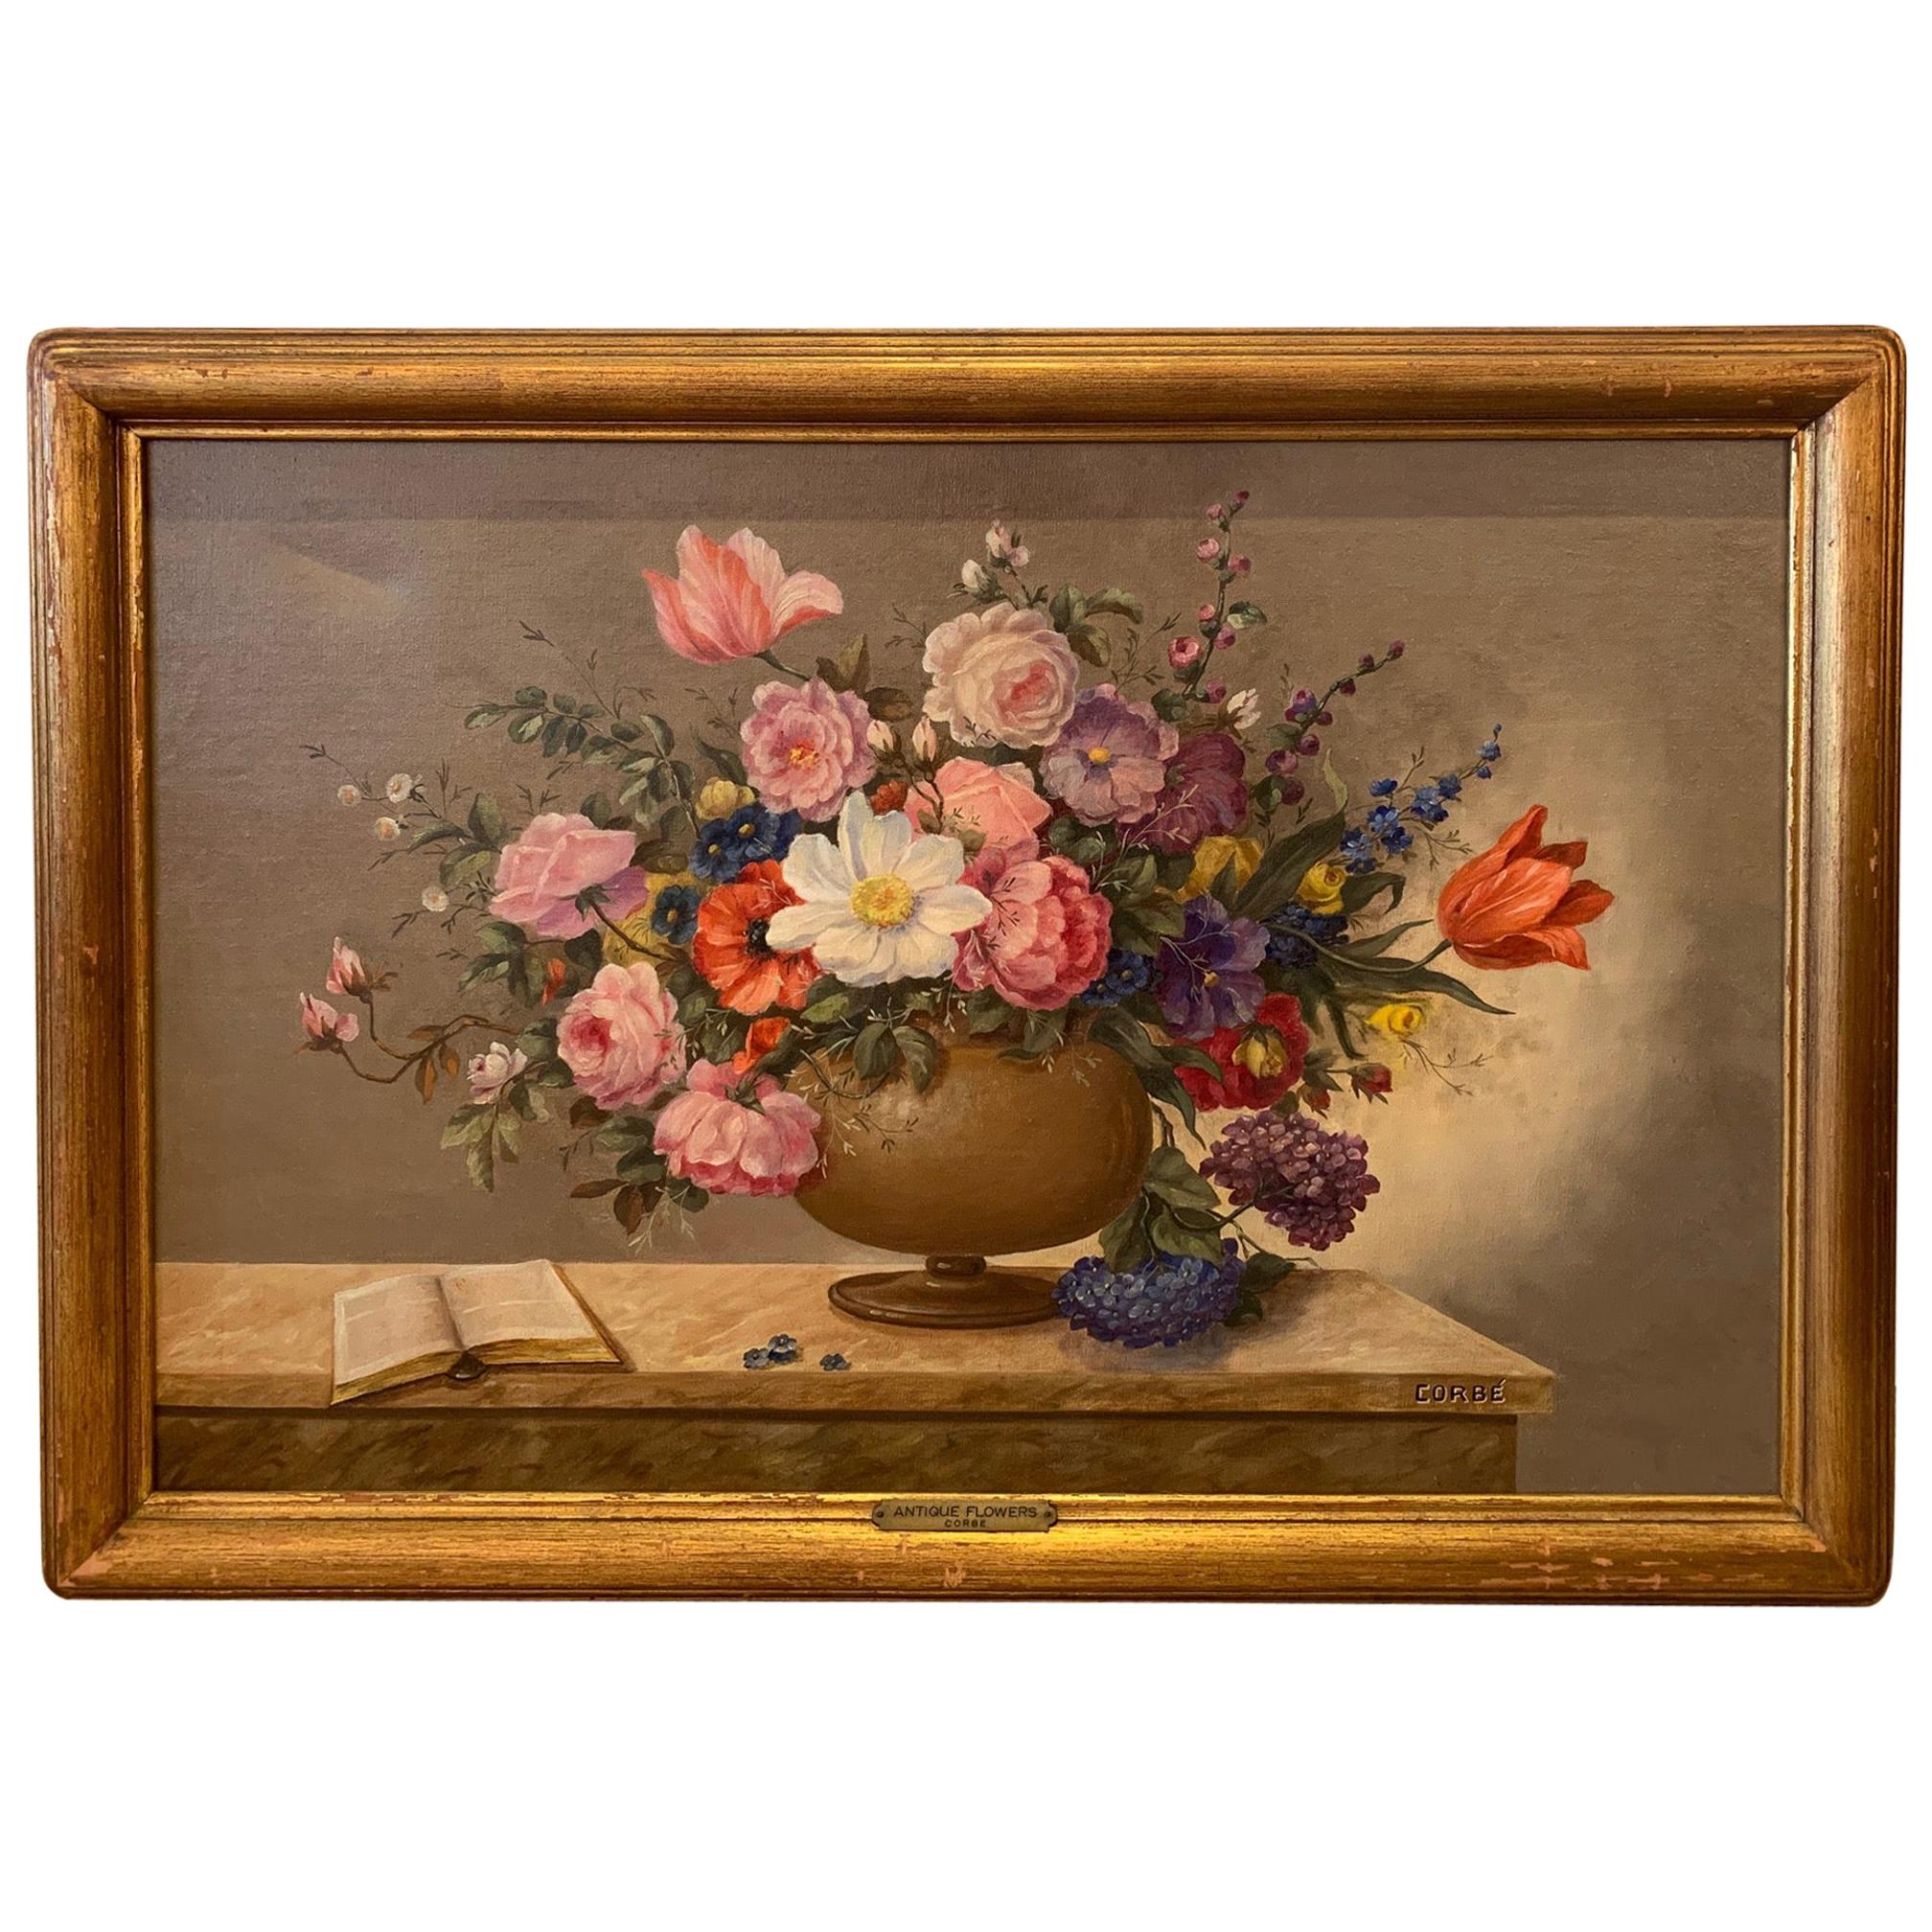 Lovely French Floral Still Life Painting on Canvas by Corbe